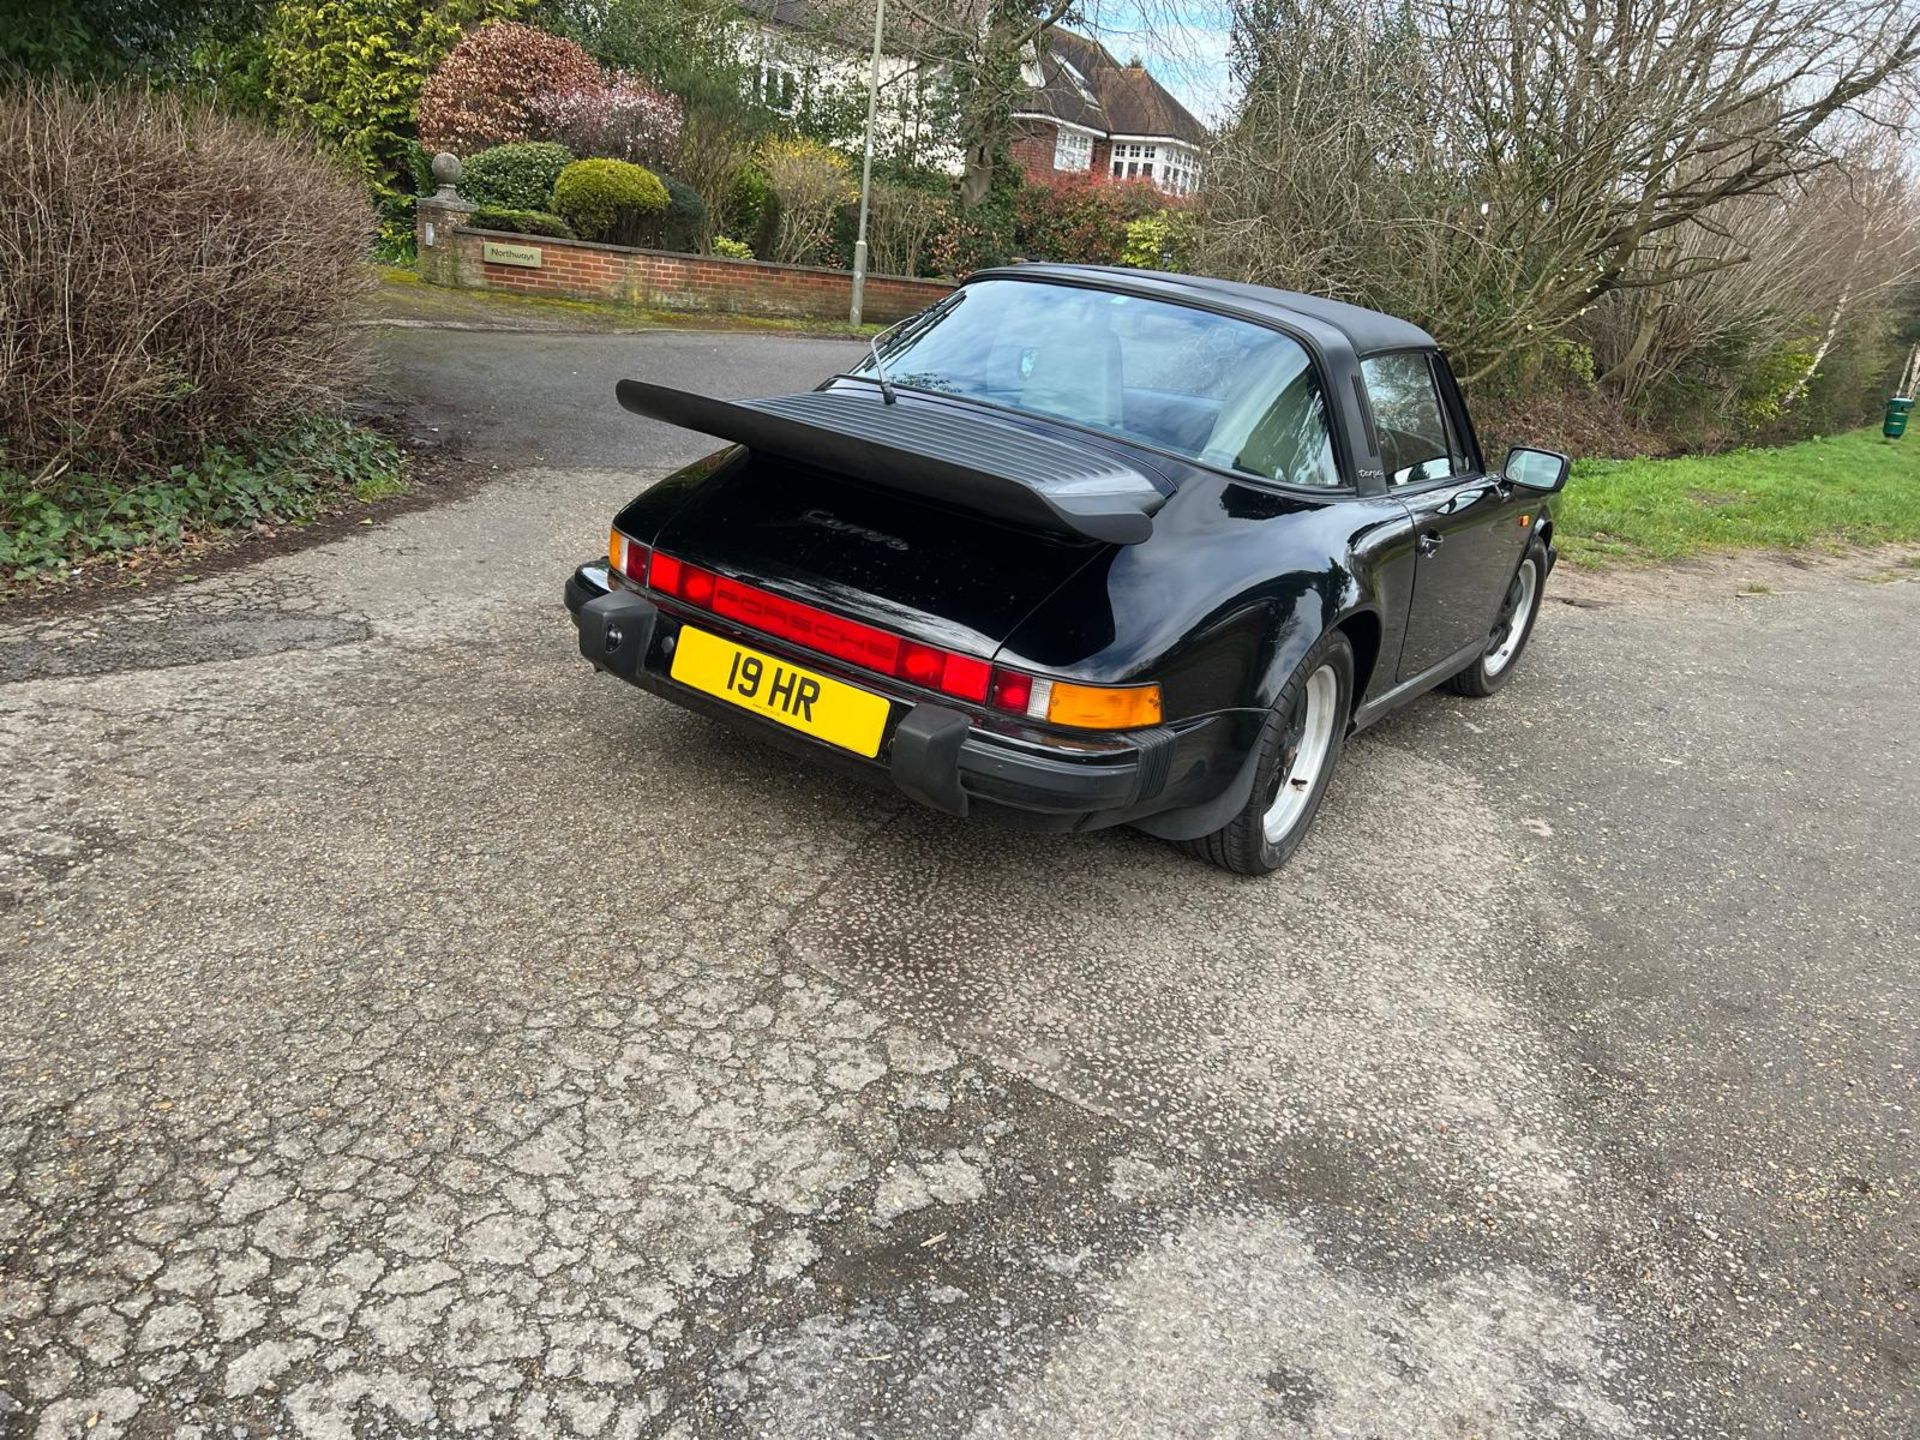 1988 Porsche Carrera Targa 3.2 - 27 yrs ownership, 61,000 miles with only 3500 miles in last 25 yrs - Image 10 of 18